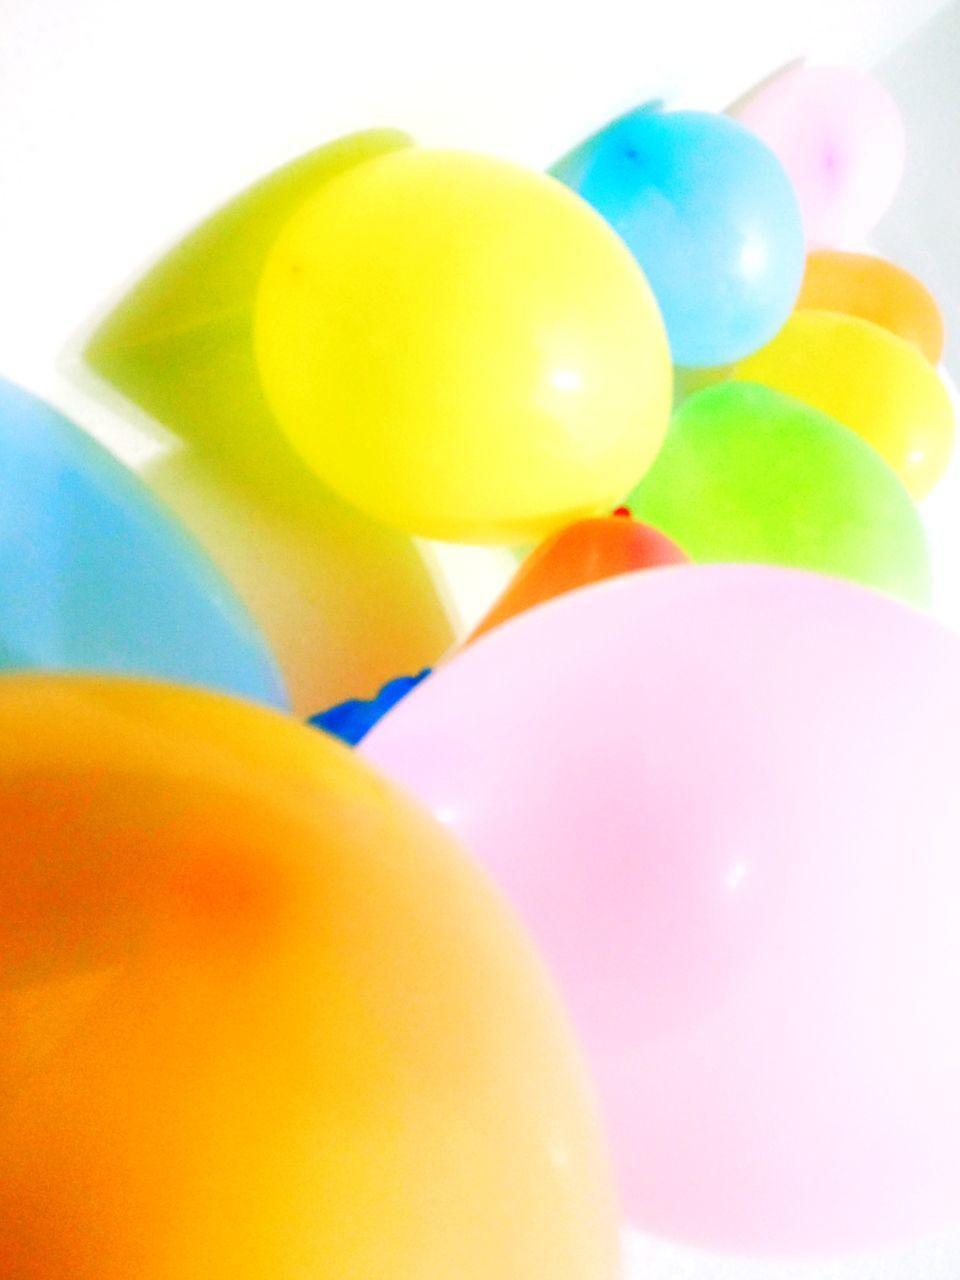 CLOSE-UP OF BALLOONS